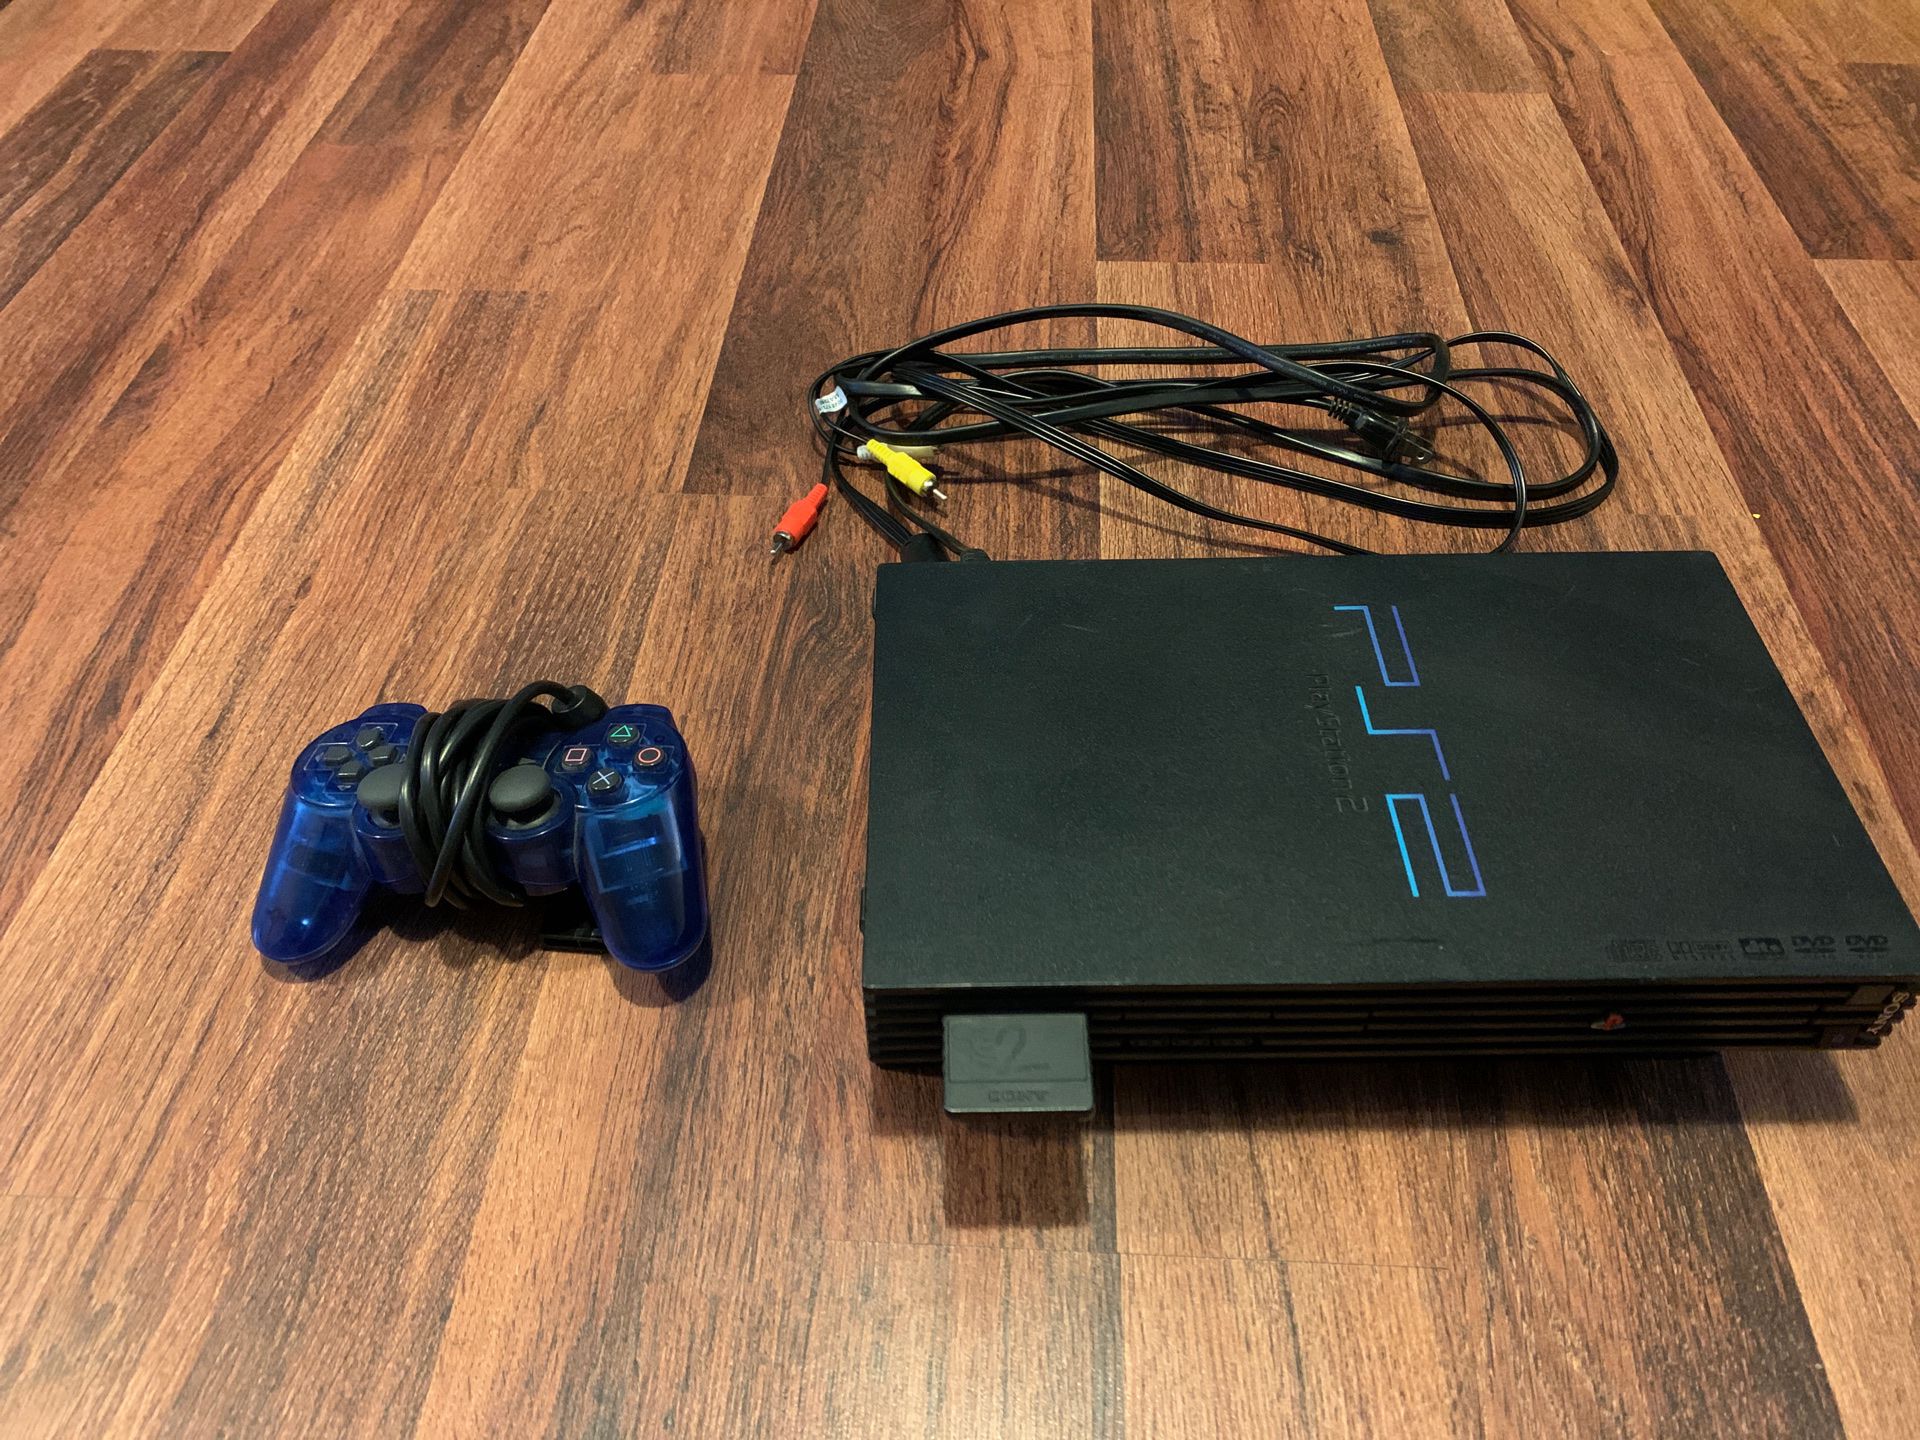 Original PS2, with controller, memory stick, and Spider- Man game